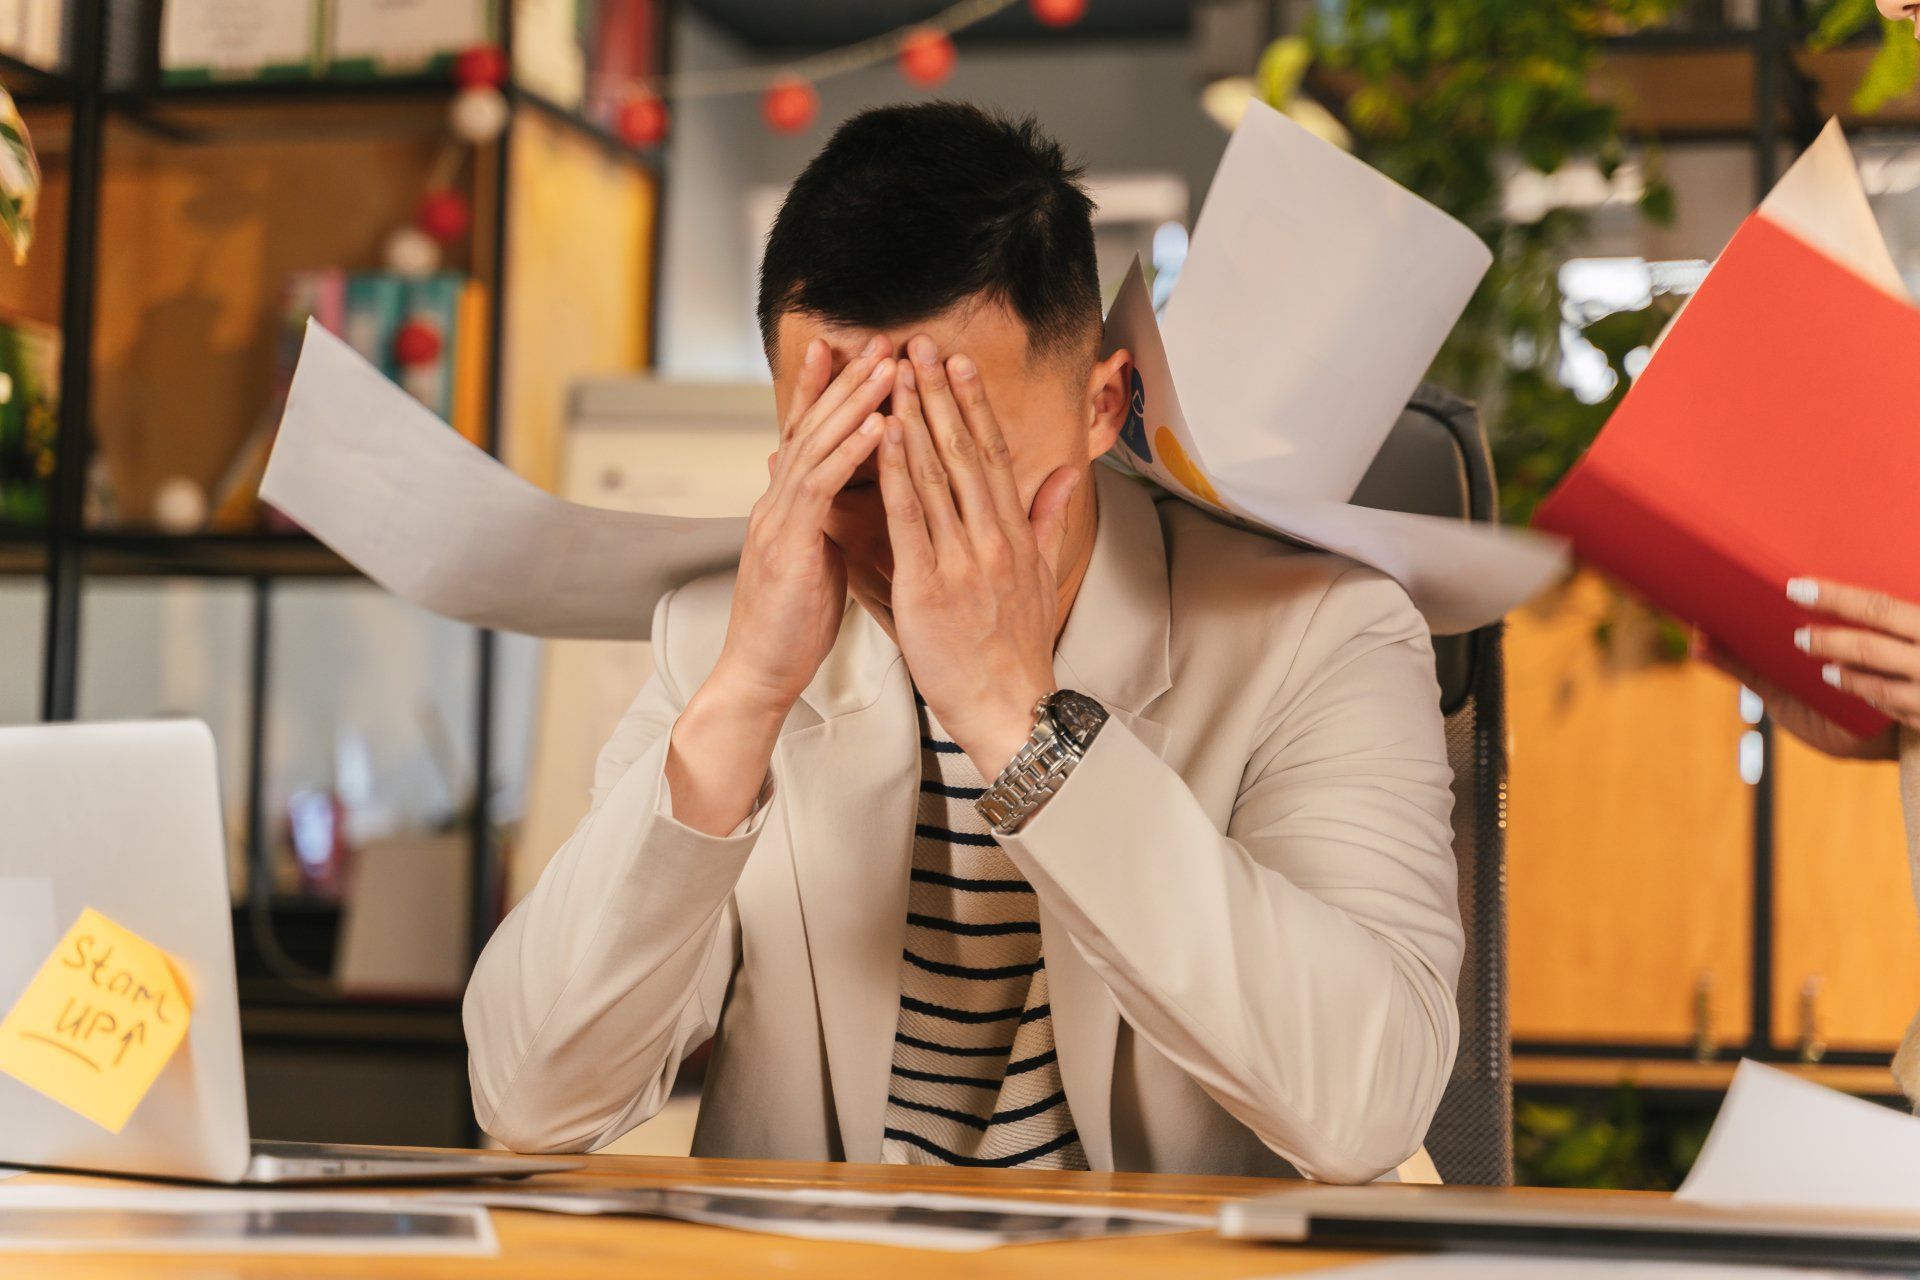 5 Ways Employers Can Mitigate Workplace Fatigue and Burnout